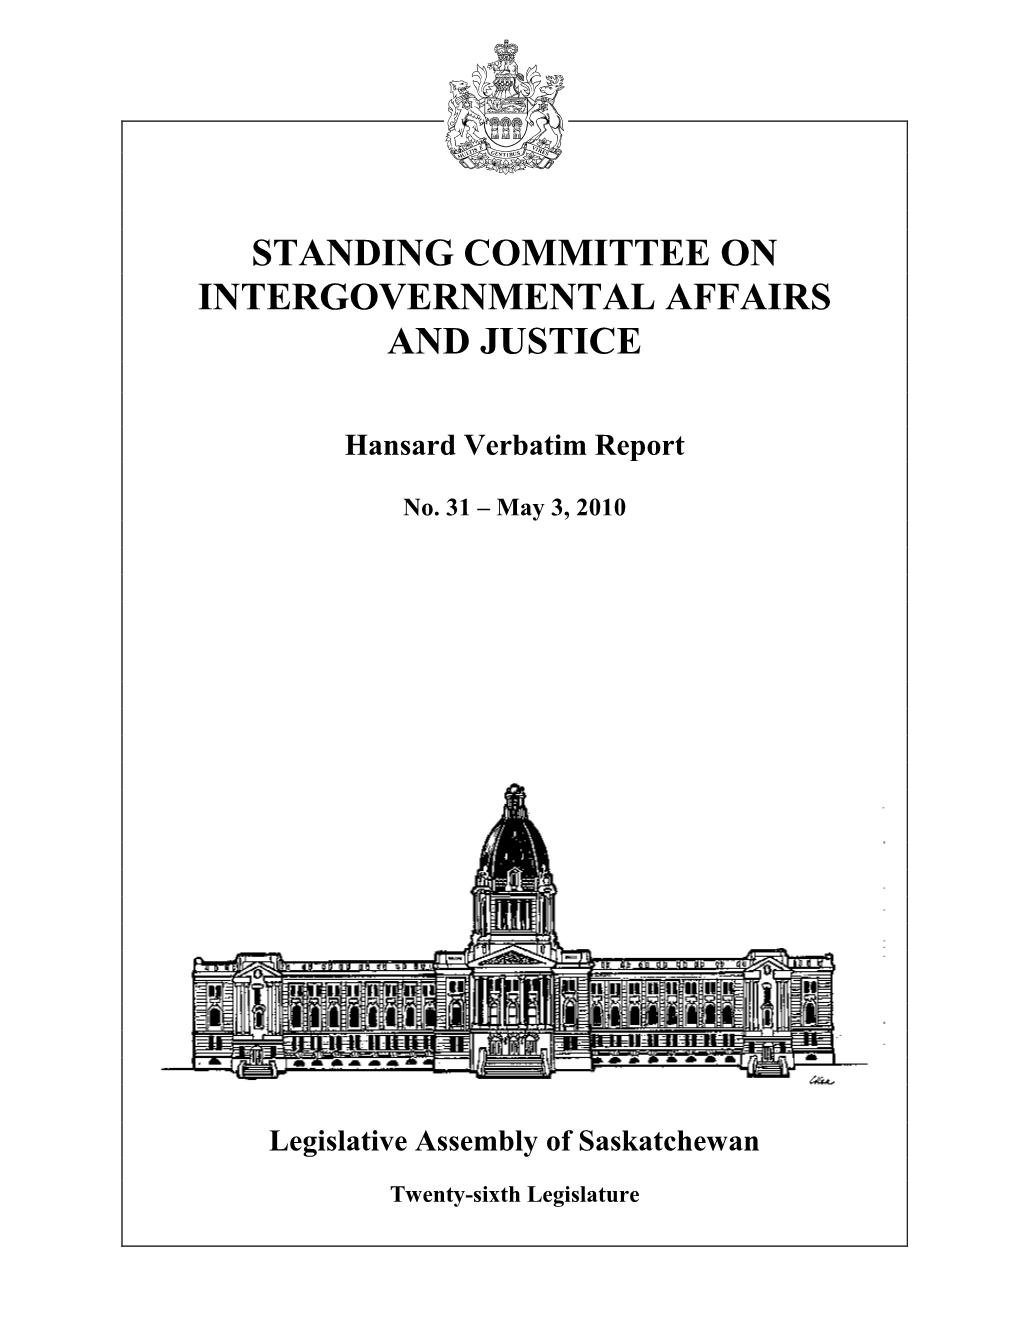 Standing Committee on Intergovernmental Affairs and Justice